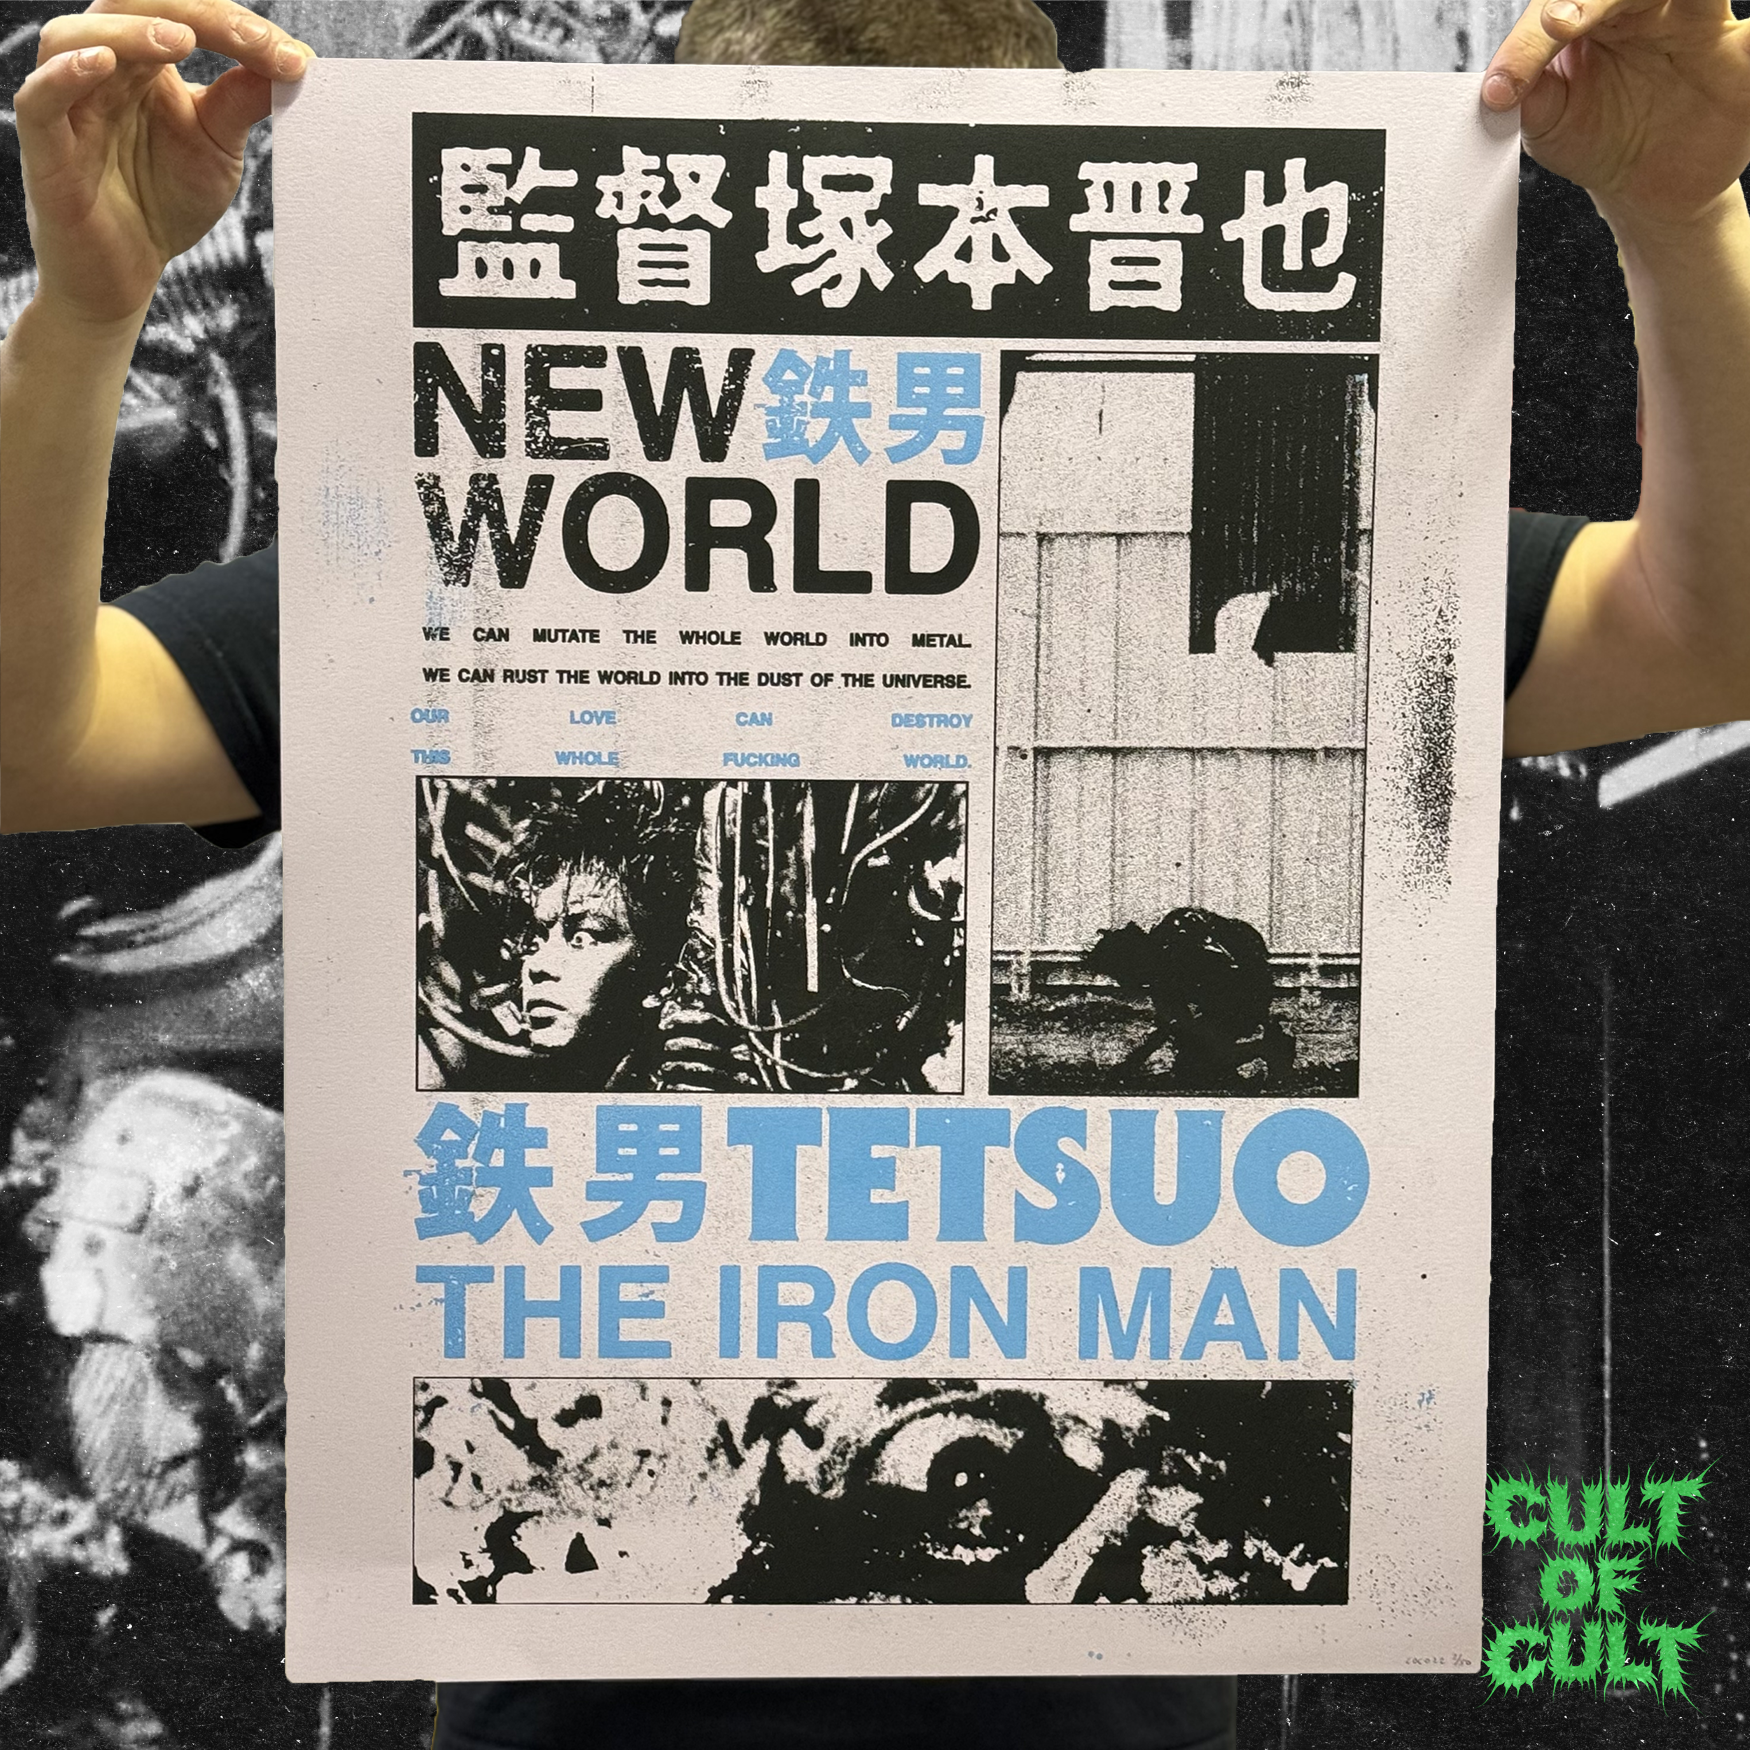 The Grapesicle purple Tetsuo poster being held up